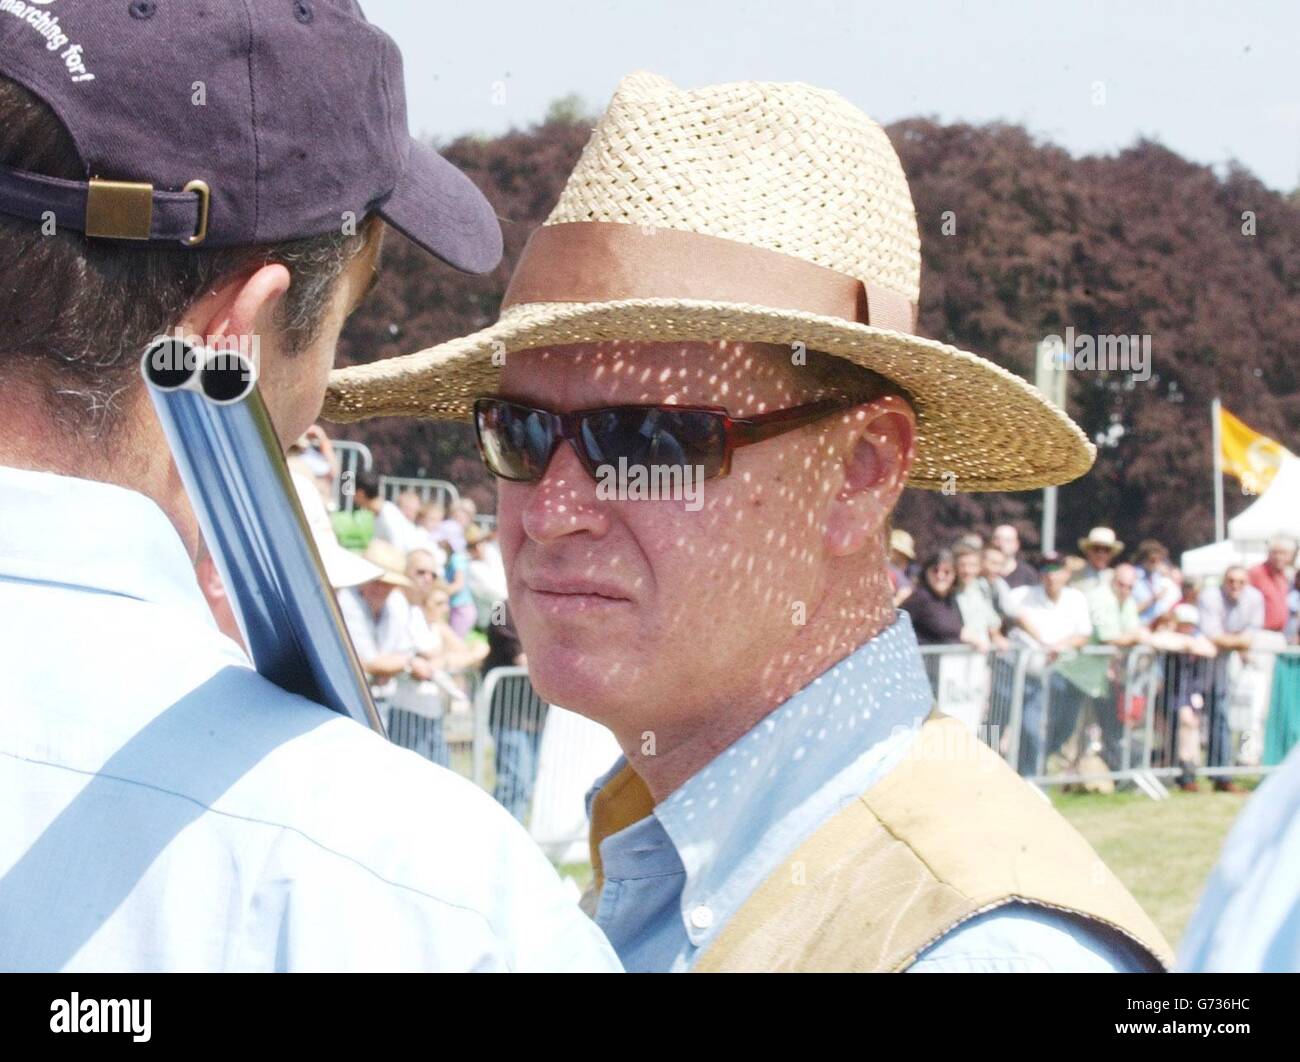 James Hewitt, the former lover of Diana, Princess of Wales, who was released on bail Thursday after being arrested by police in a drugs bust, at the Game Fair at Blenheim Palace in Oxfordshire. Hewitt, 46, was arrested in the street near his home in Chelsea, west London, along with TV presenter Alison Bell, 37, a former girlfriend of the Earl of Wessex, who he has been seeing for three months. Stock Photo